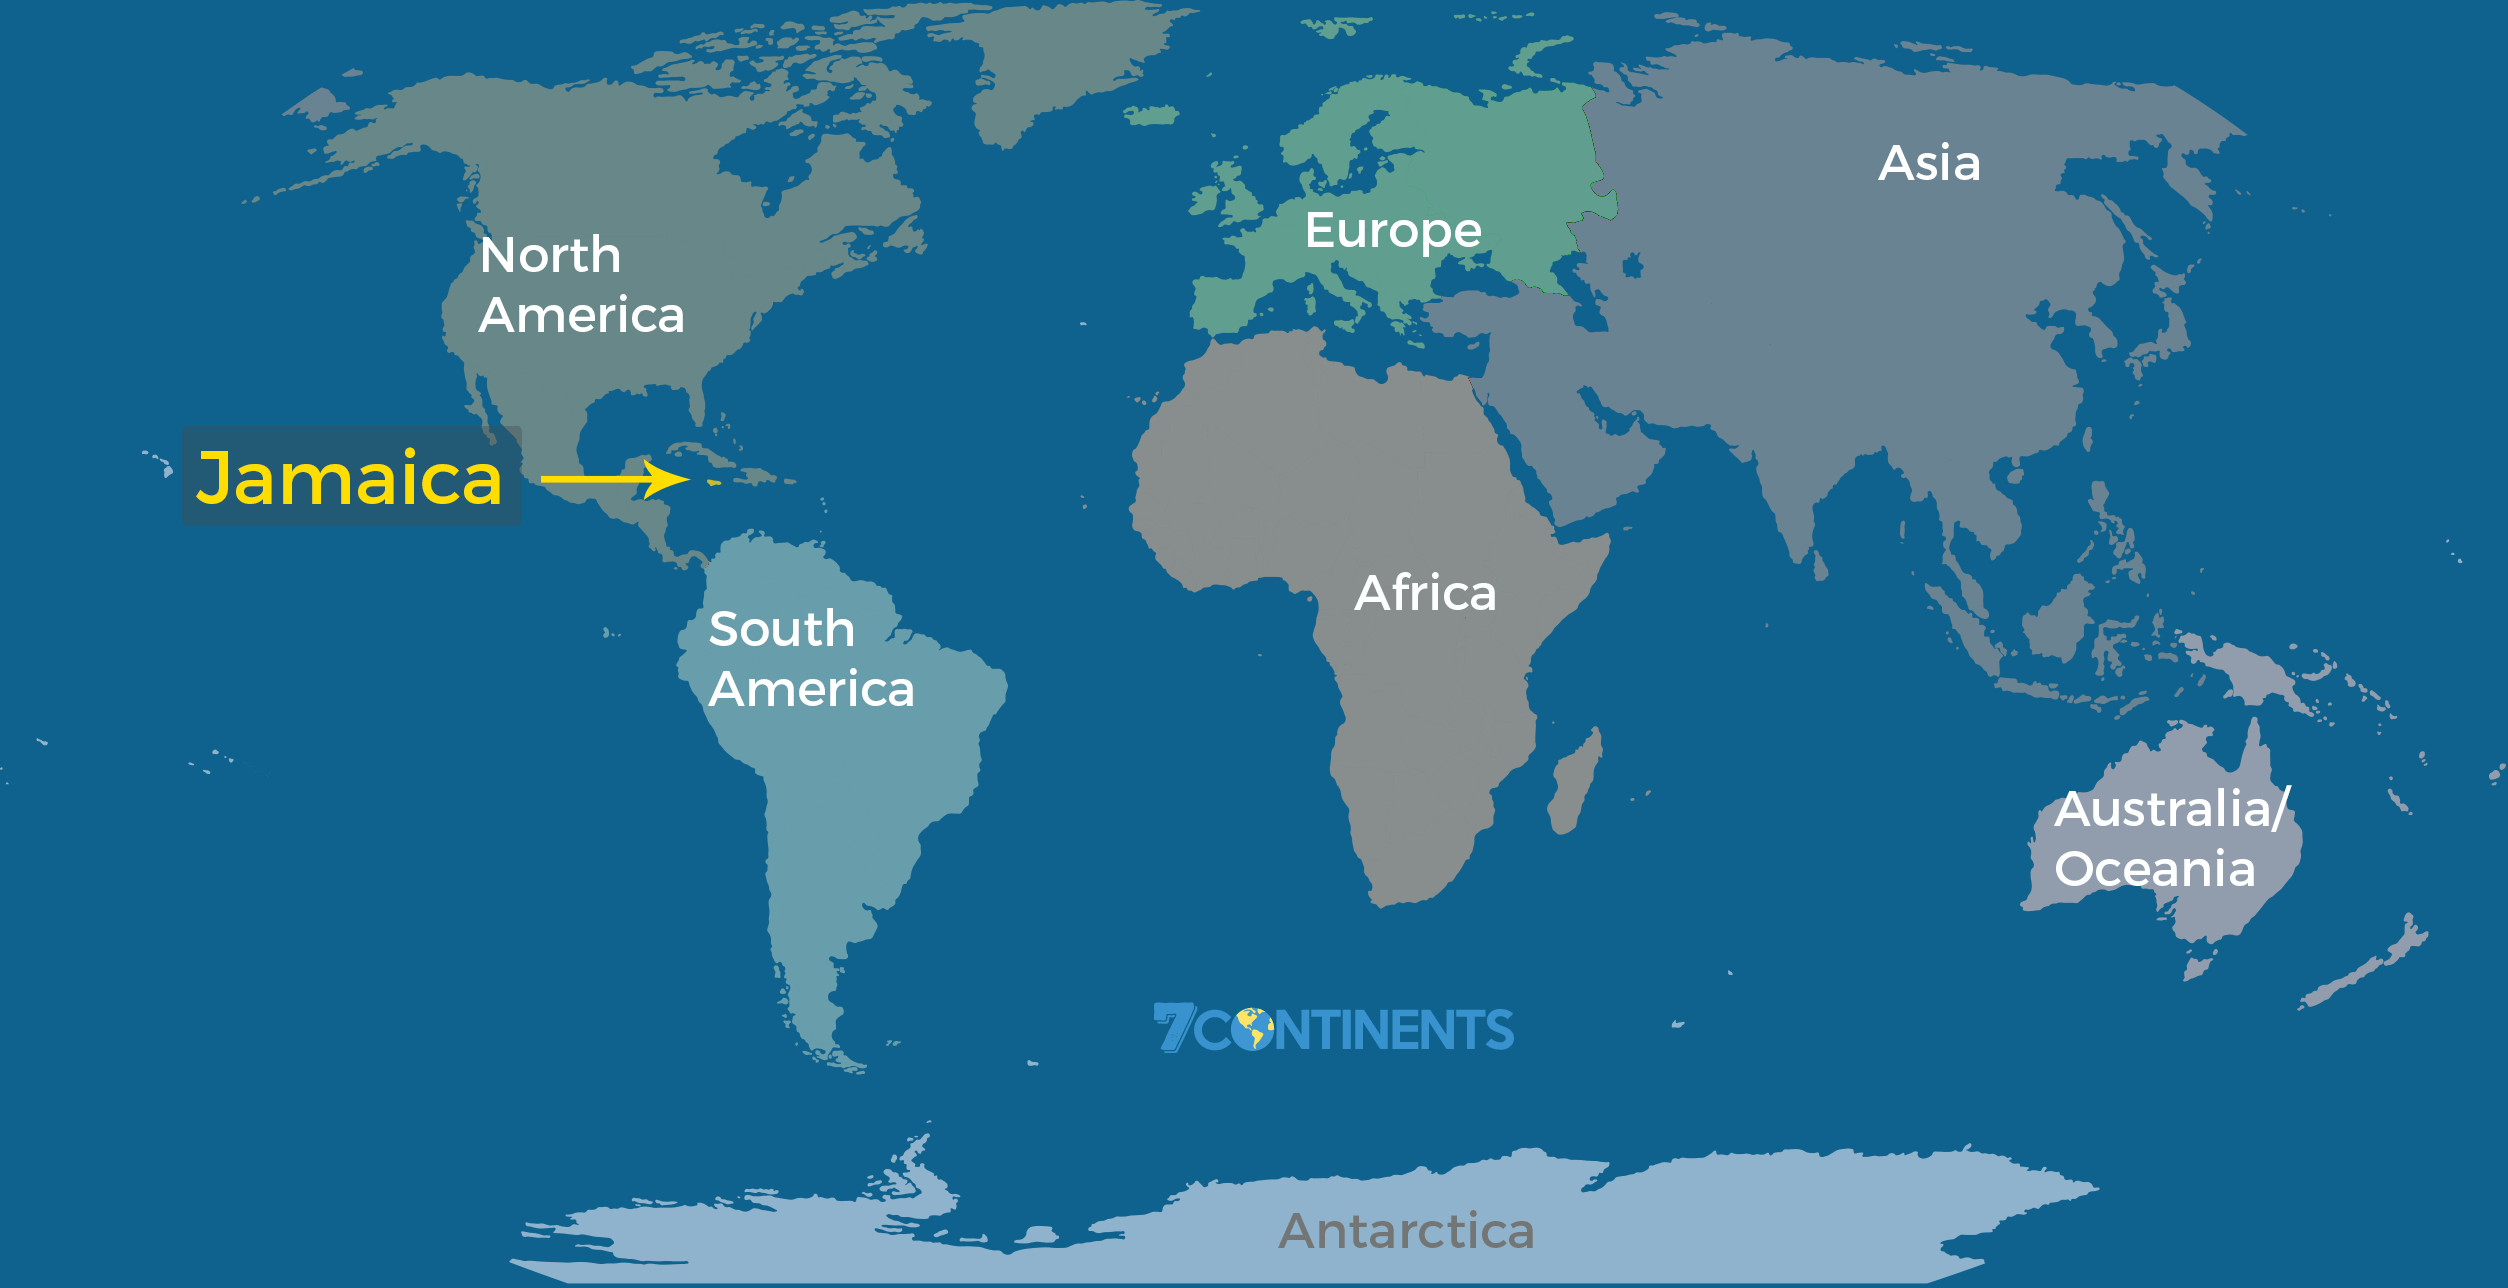 The 7 Continents of the World